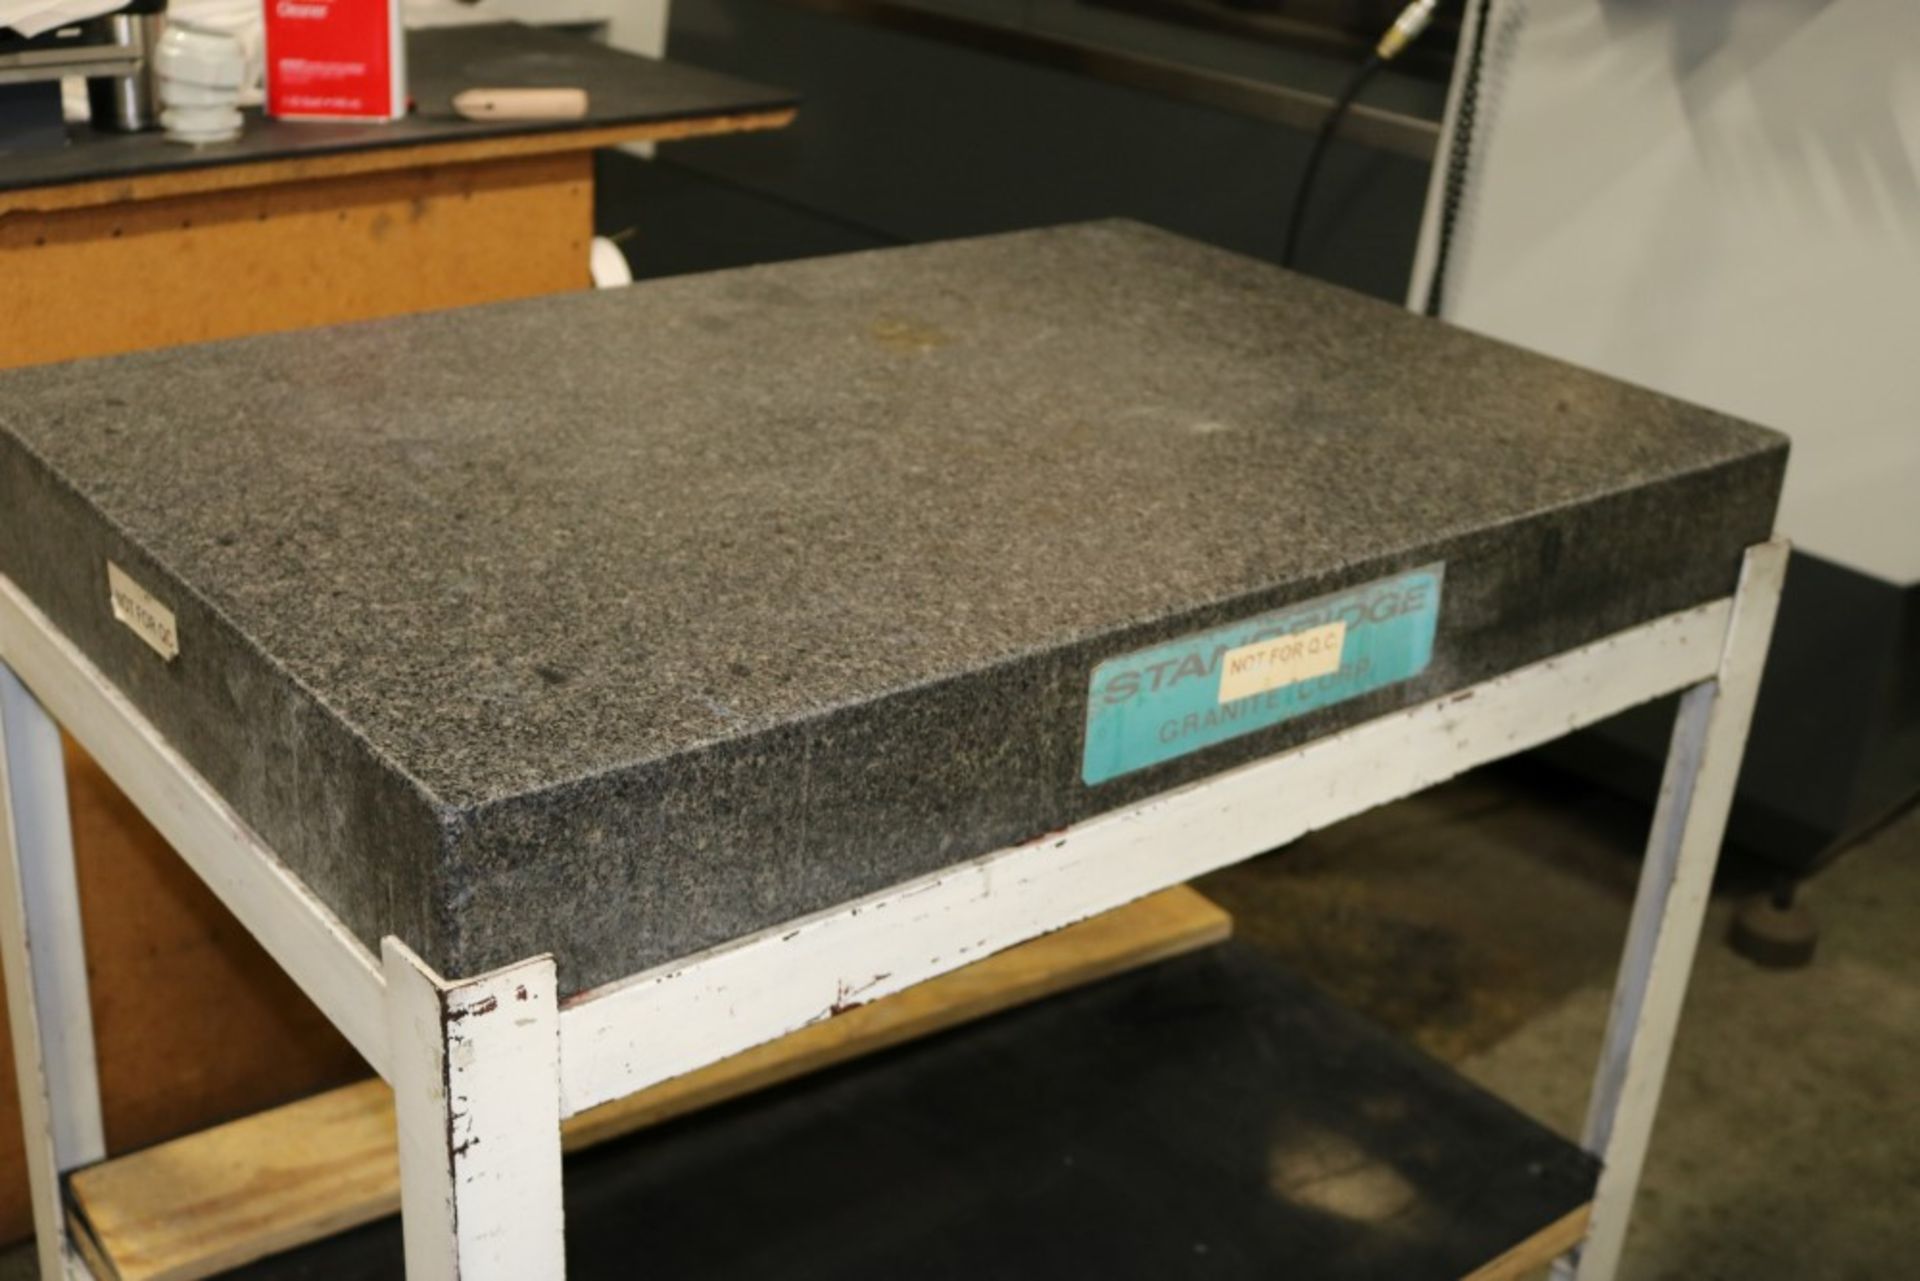 Standridge Granite Inspection Table on Stand 2' x 3' x 4" - Image 2 of 6